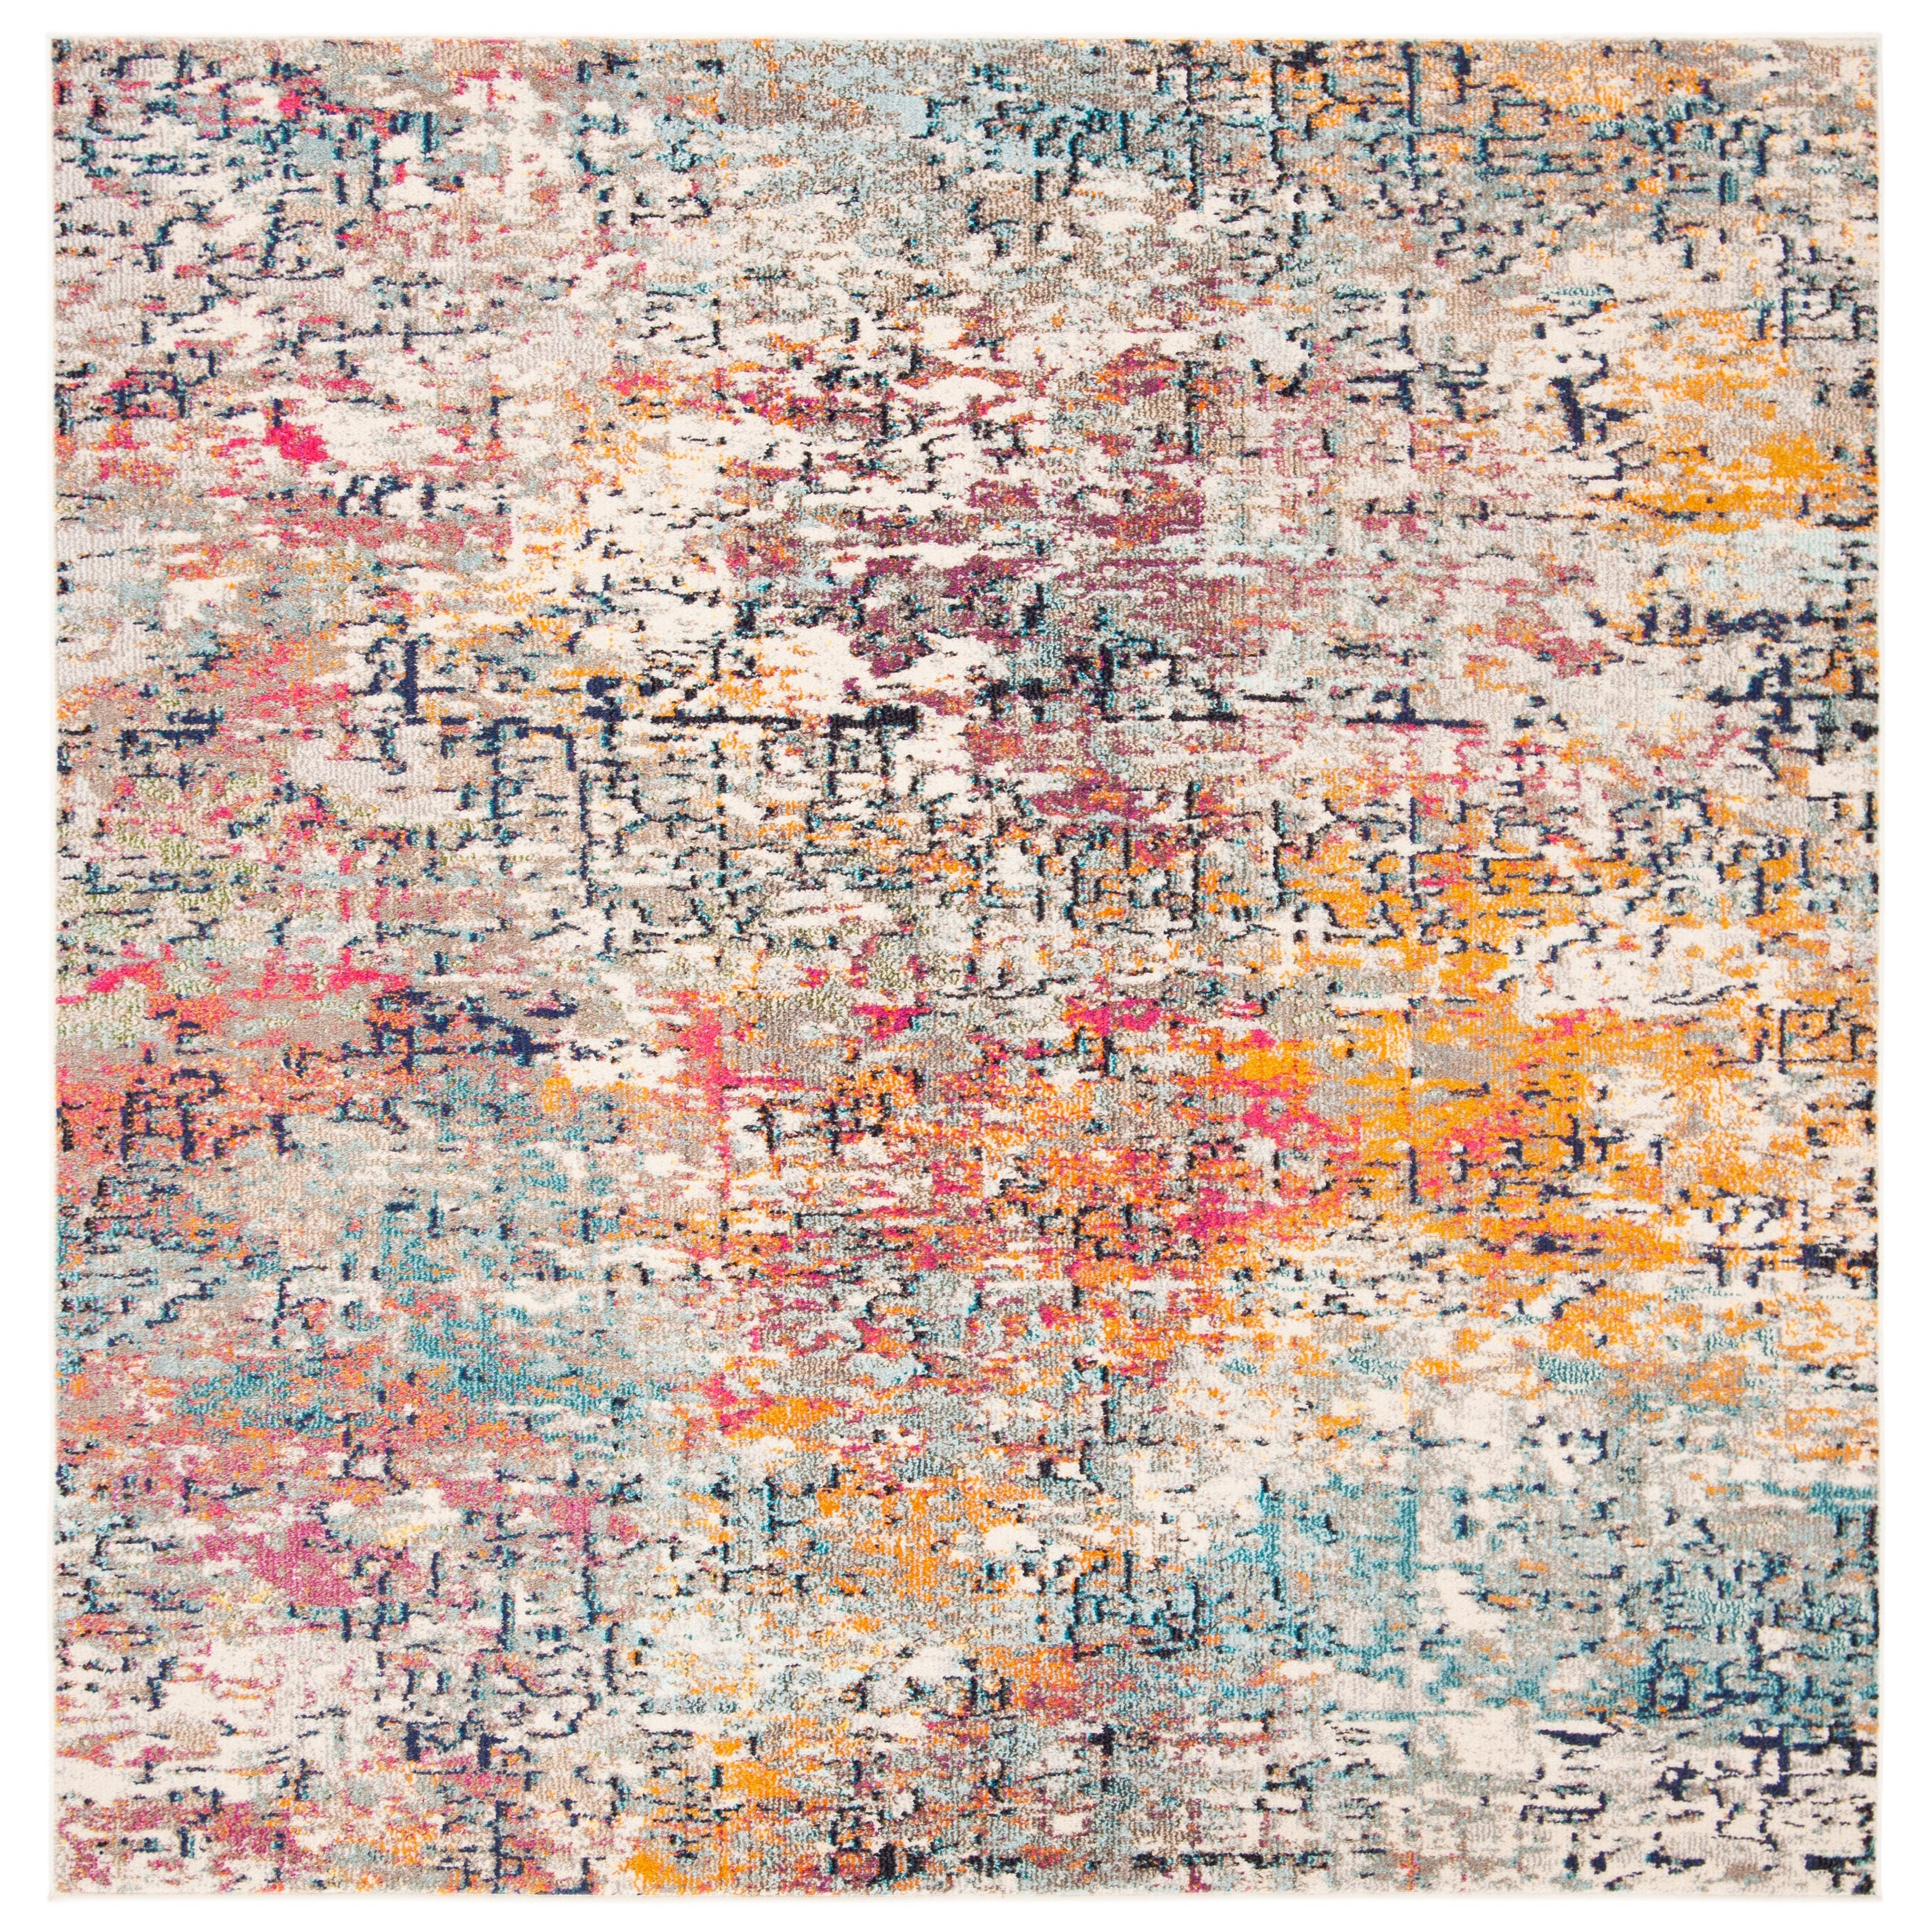 https://ak1.ostkcdn.com/images/products/is/images/direct/62c384ae61f2dc0adc69e192500bc8854bda0842/SAFAVIEH-Madison-Loane-Modern-Abstract-Rug.jpg